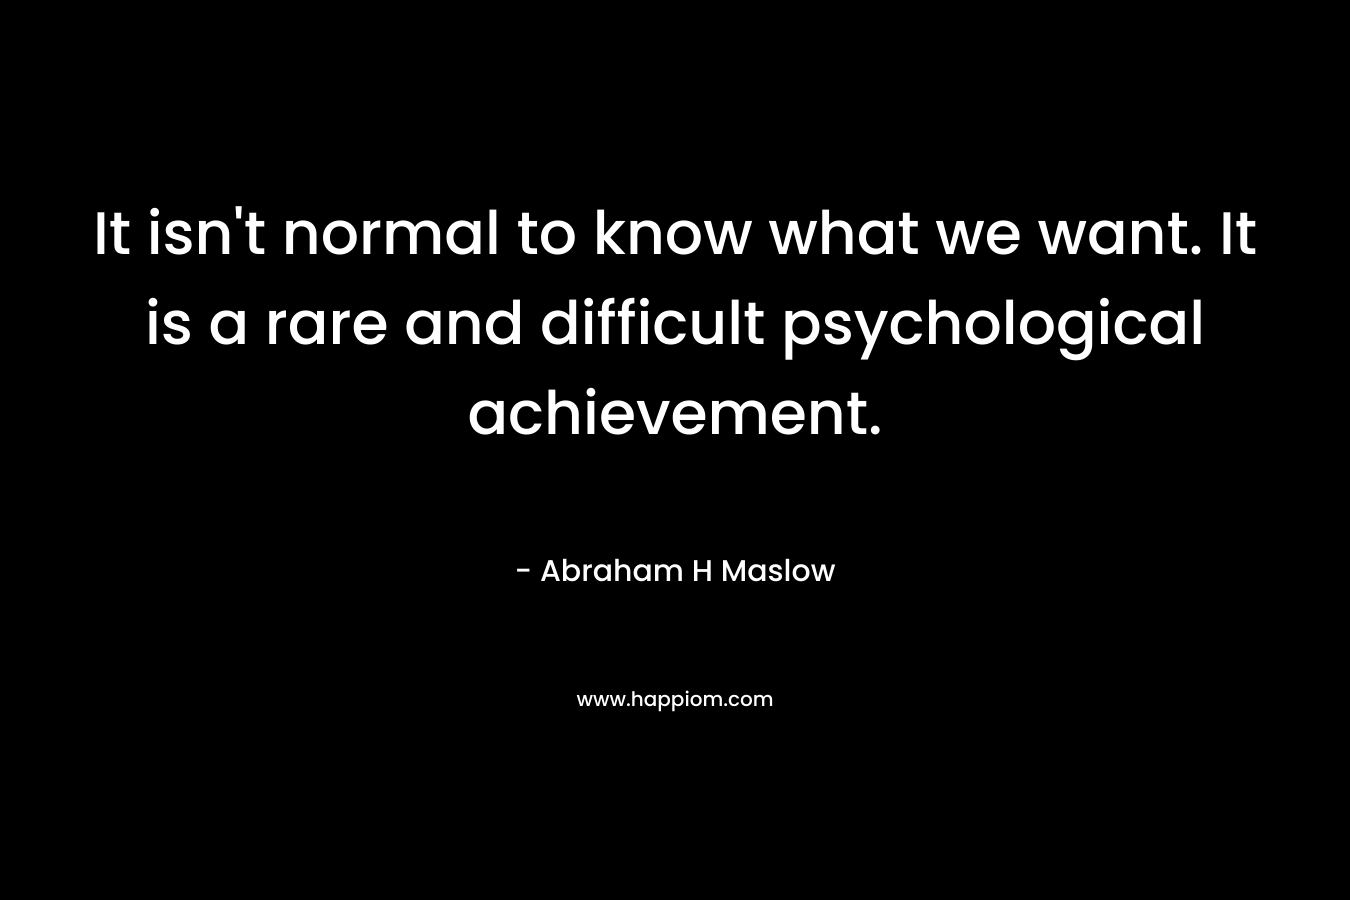 It isn't normal to know what we want. It is a rare and difficult psychological achievement.